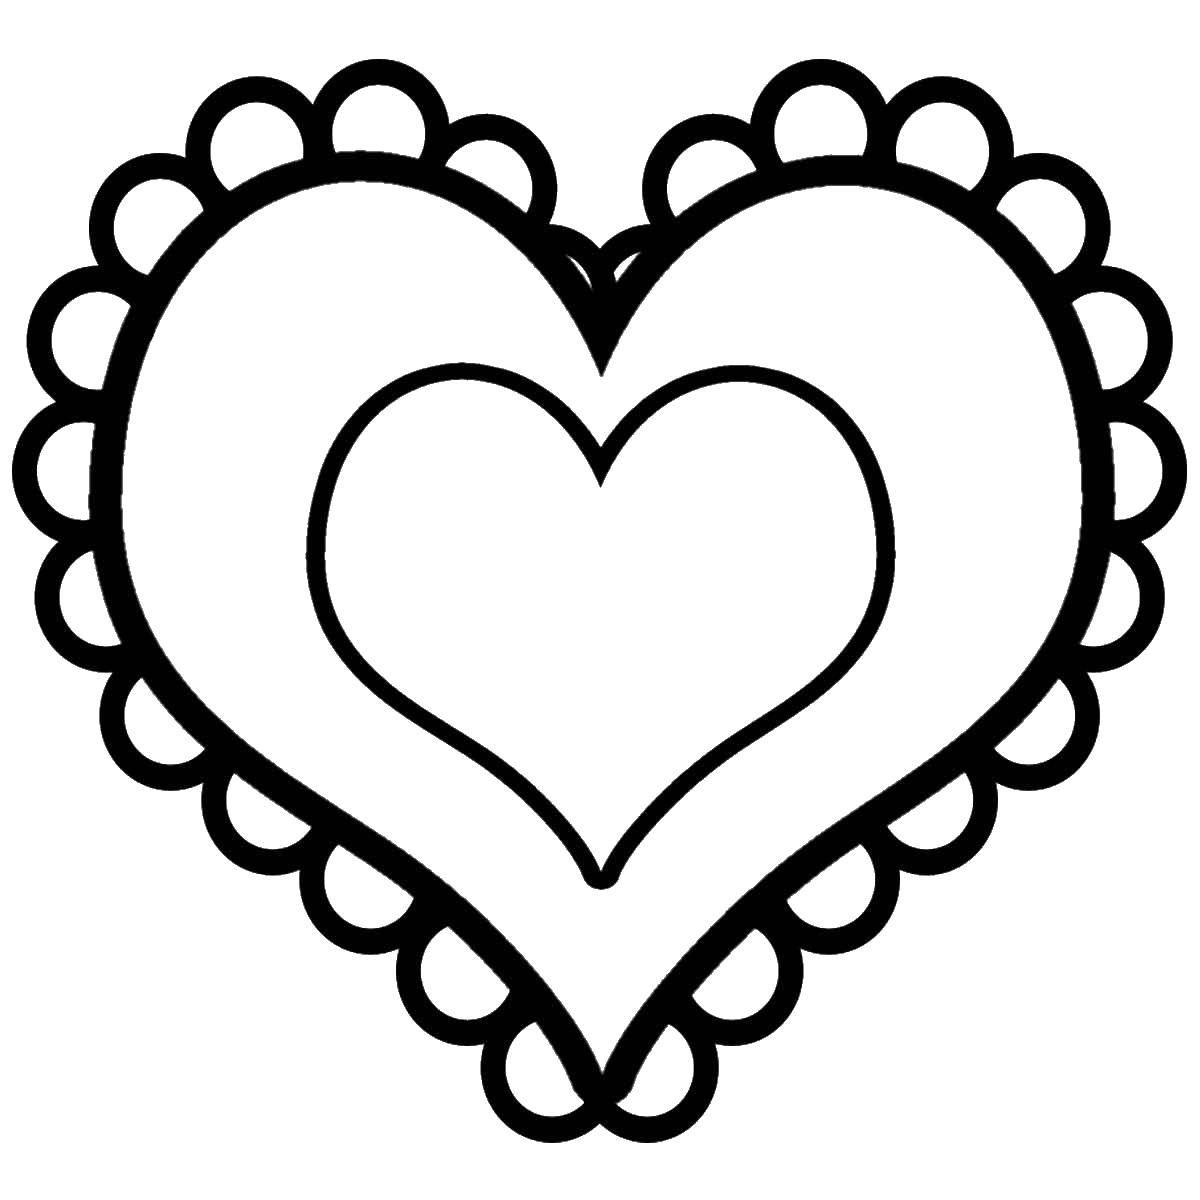 Coloring Lace heart. Category I love you. Tags:  Heart, love.